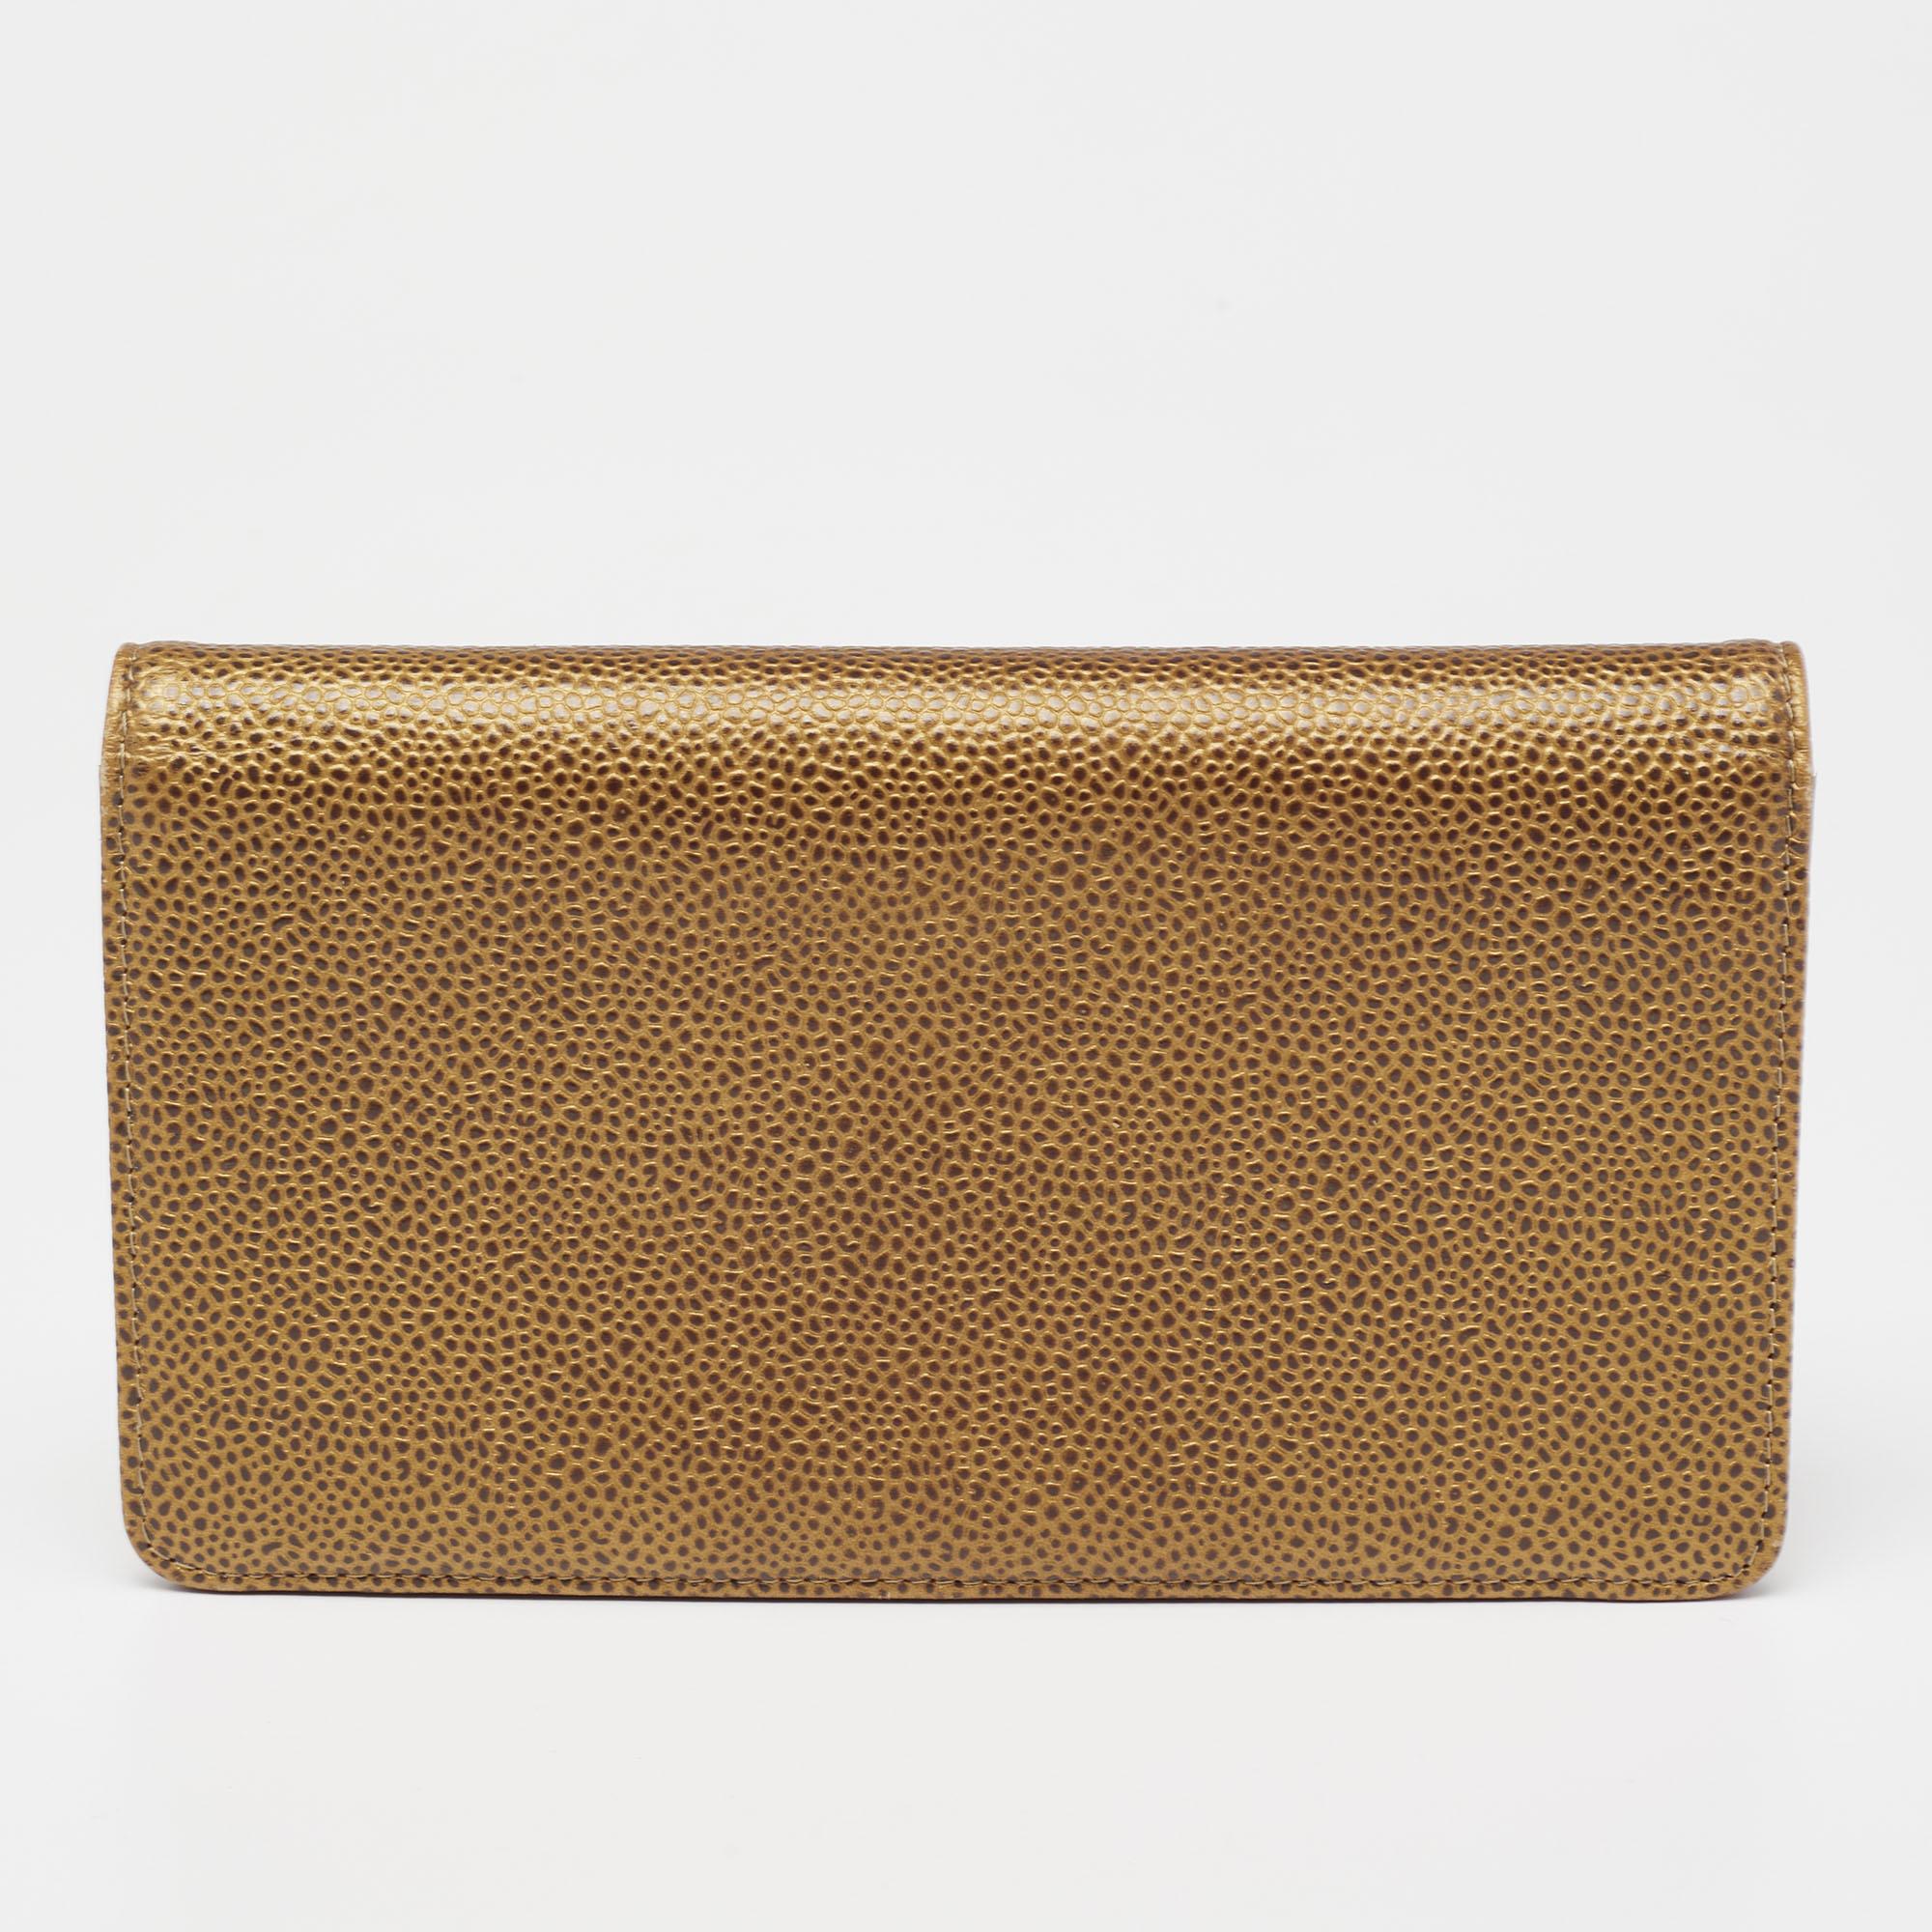 A classic wallet like this one from Chanel will make a great companion for every day. It features a gold Caviar leather body and features a bi-fold silhouette. This wallet comes equipped with several card slots and pockets to secure your cards and